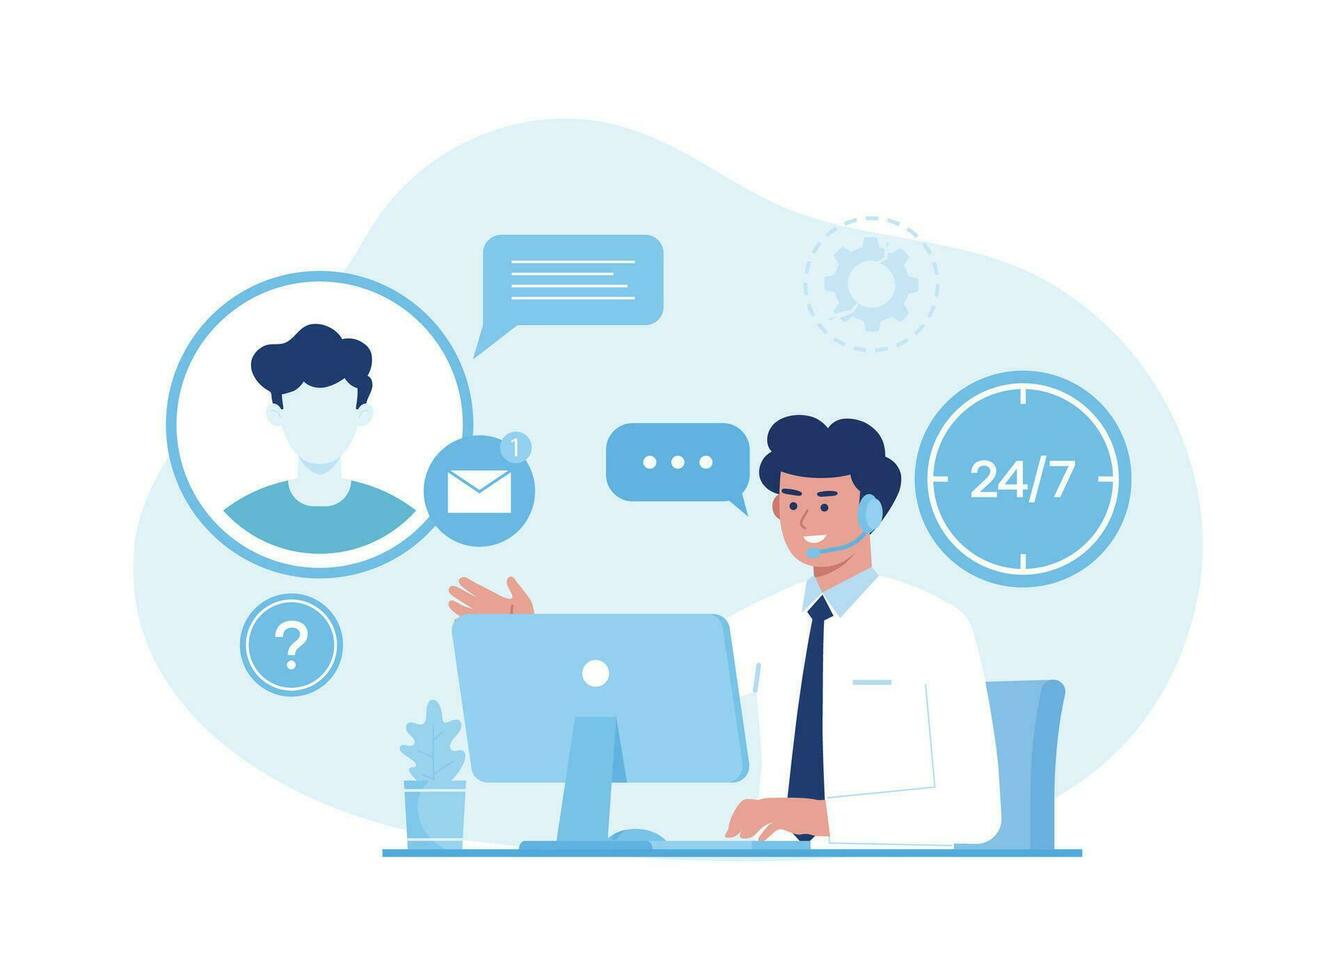 online customer service call and chat, 24 hours global concept flat illustration vector